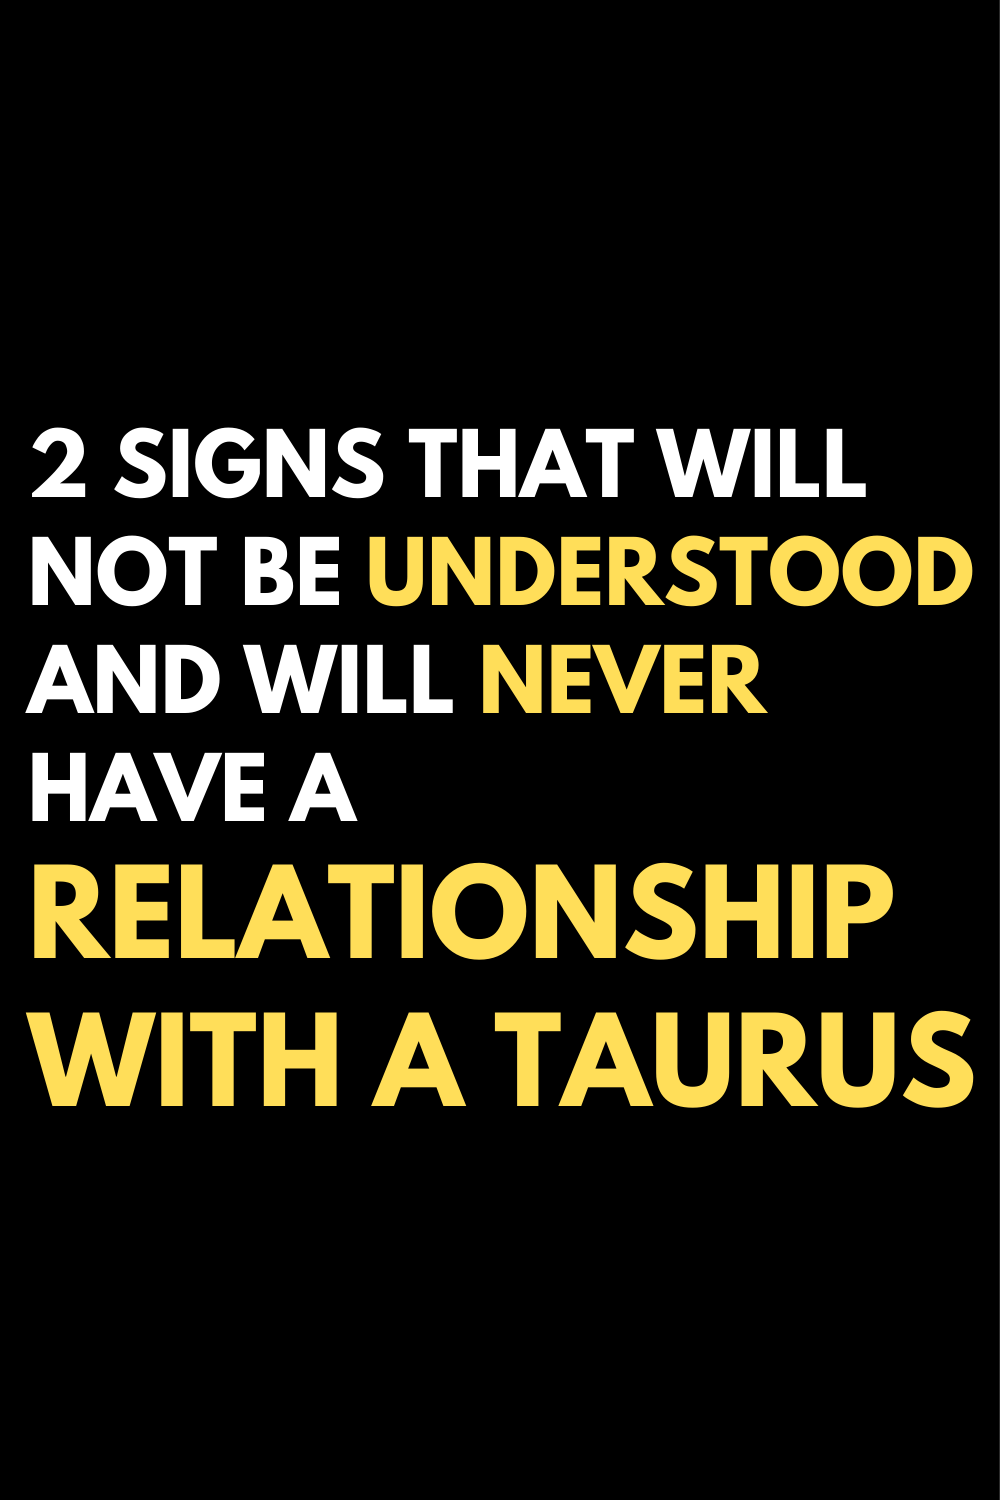 2 signs that will not be understood and will never have a relationship with a Taurus